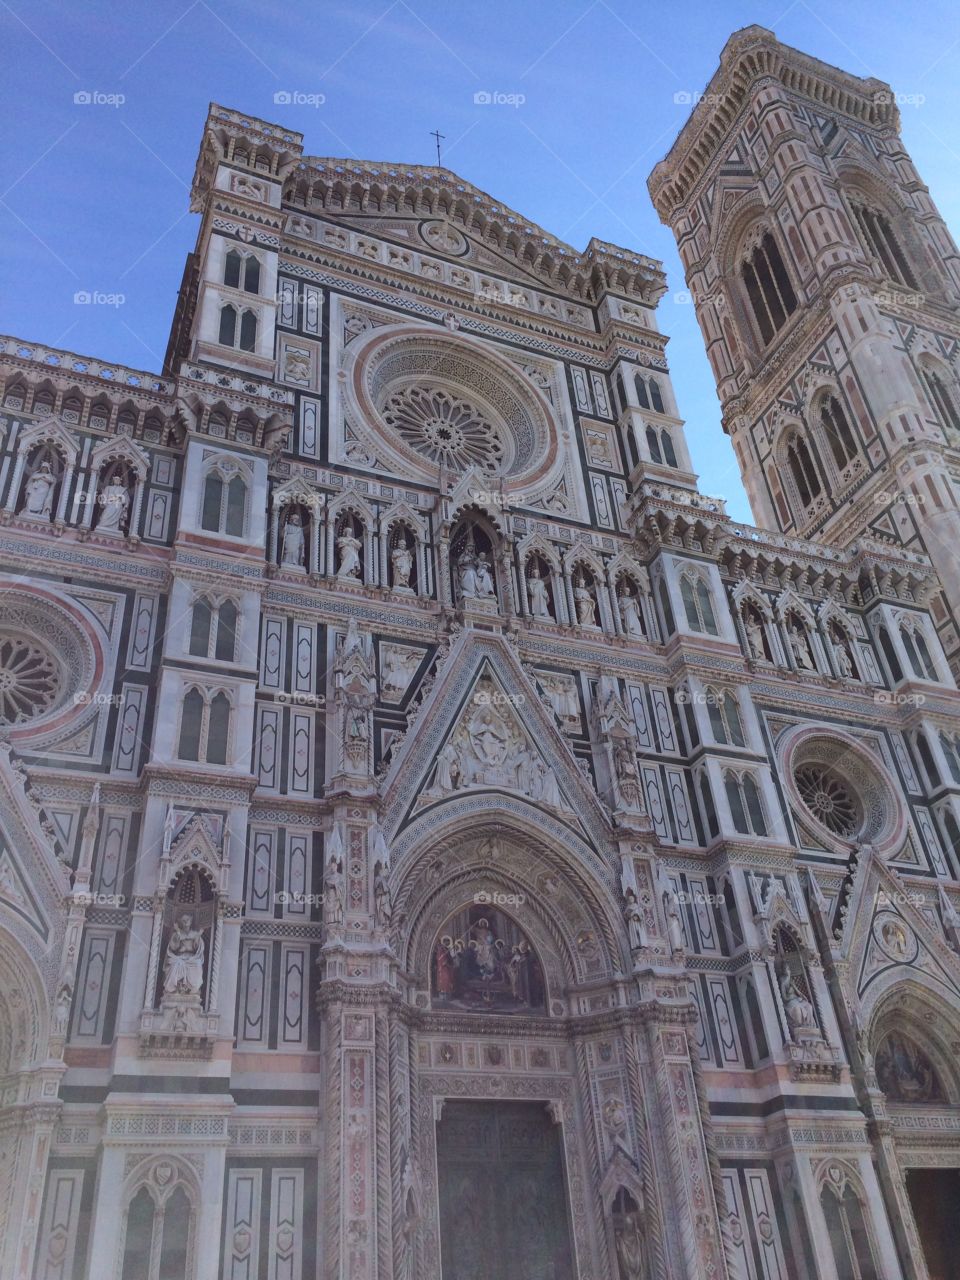 View of the details on the Cathedral of Santa Maria del Fiore in Florence, Italy. 